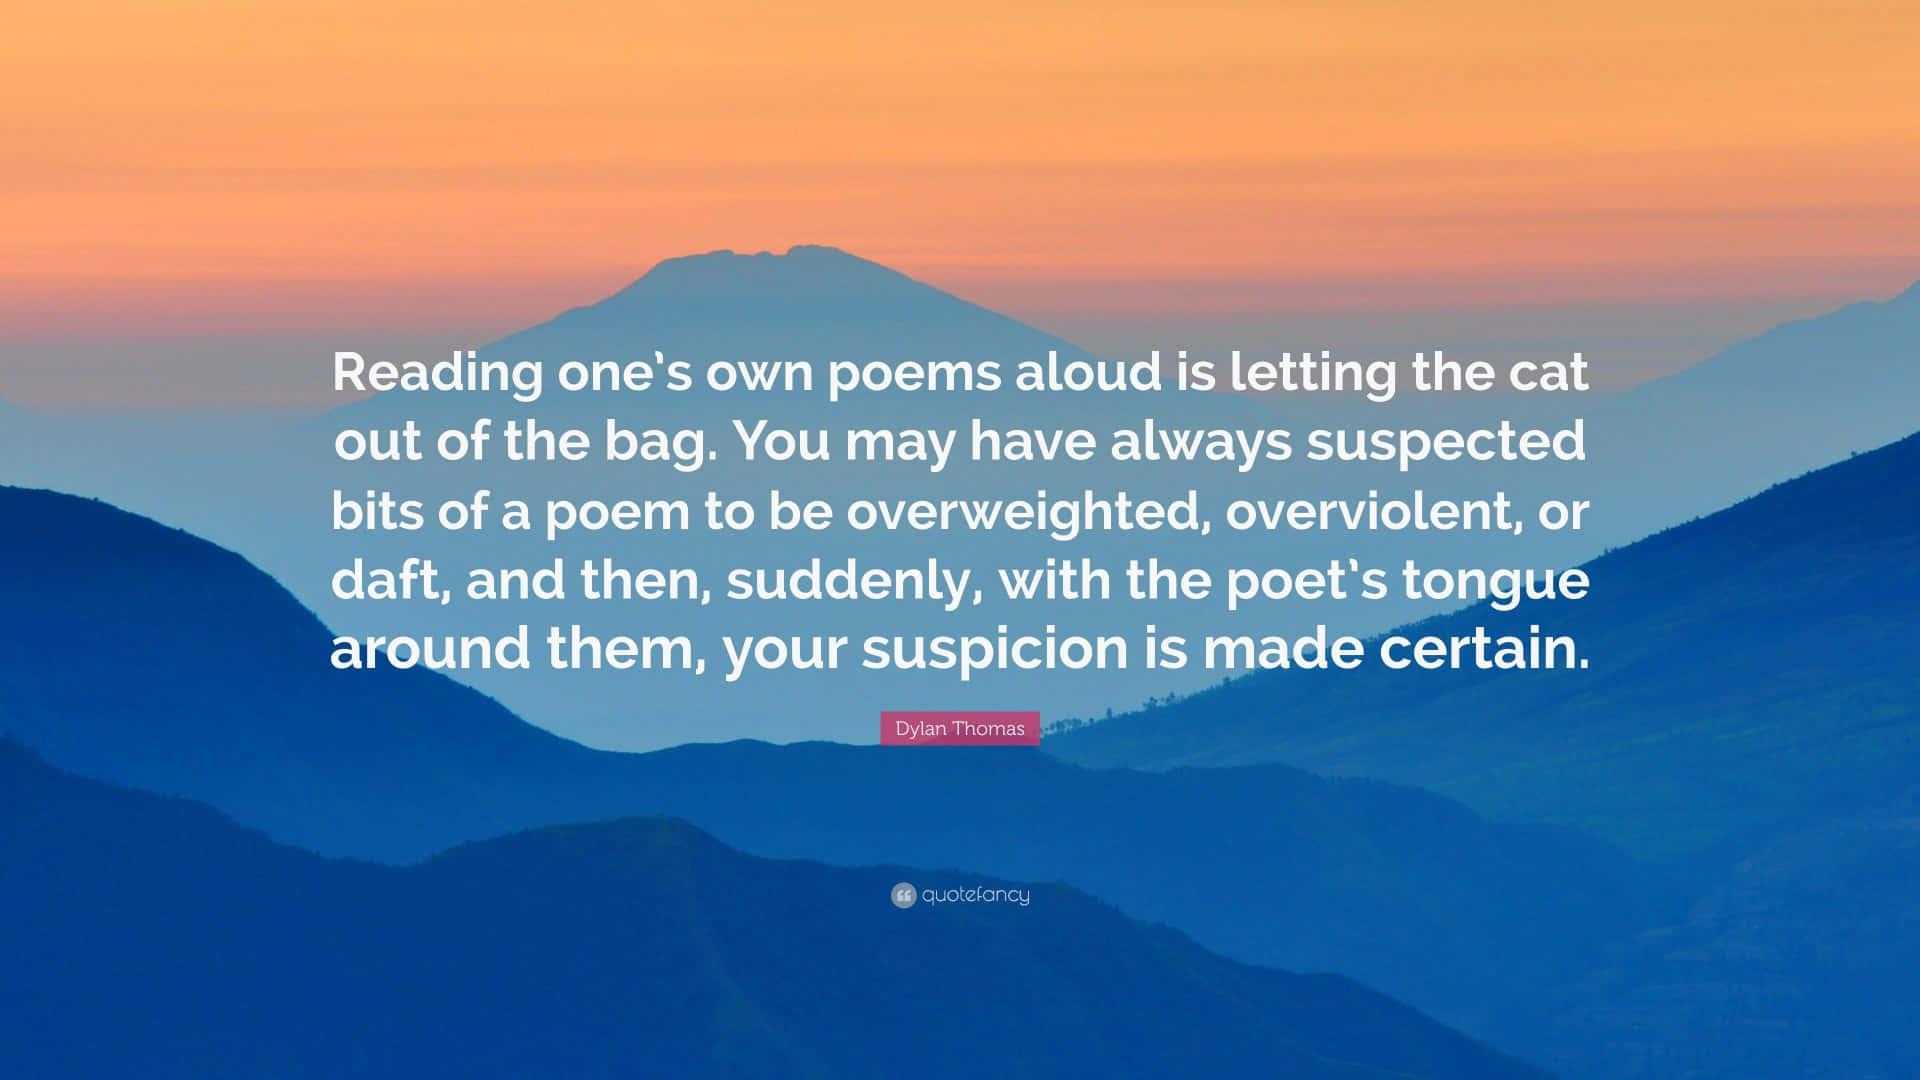 "The sweet joys of poetic expression"